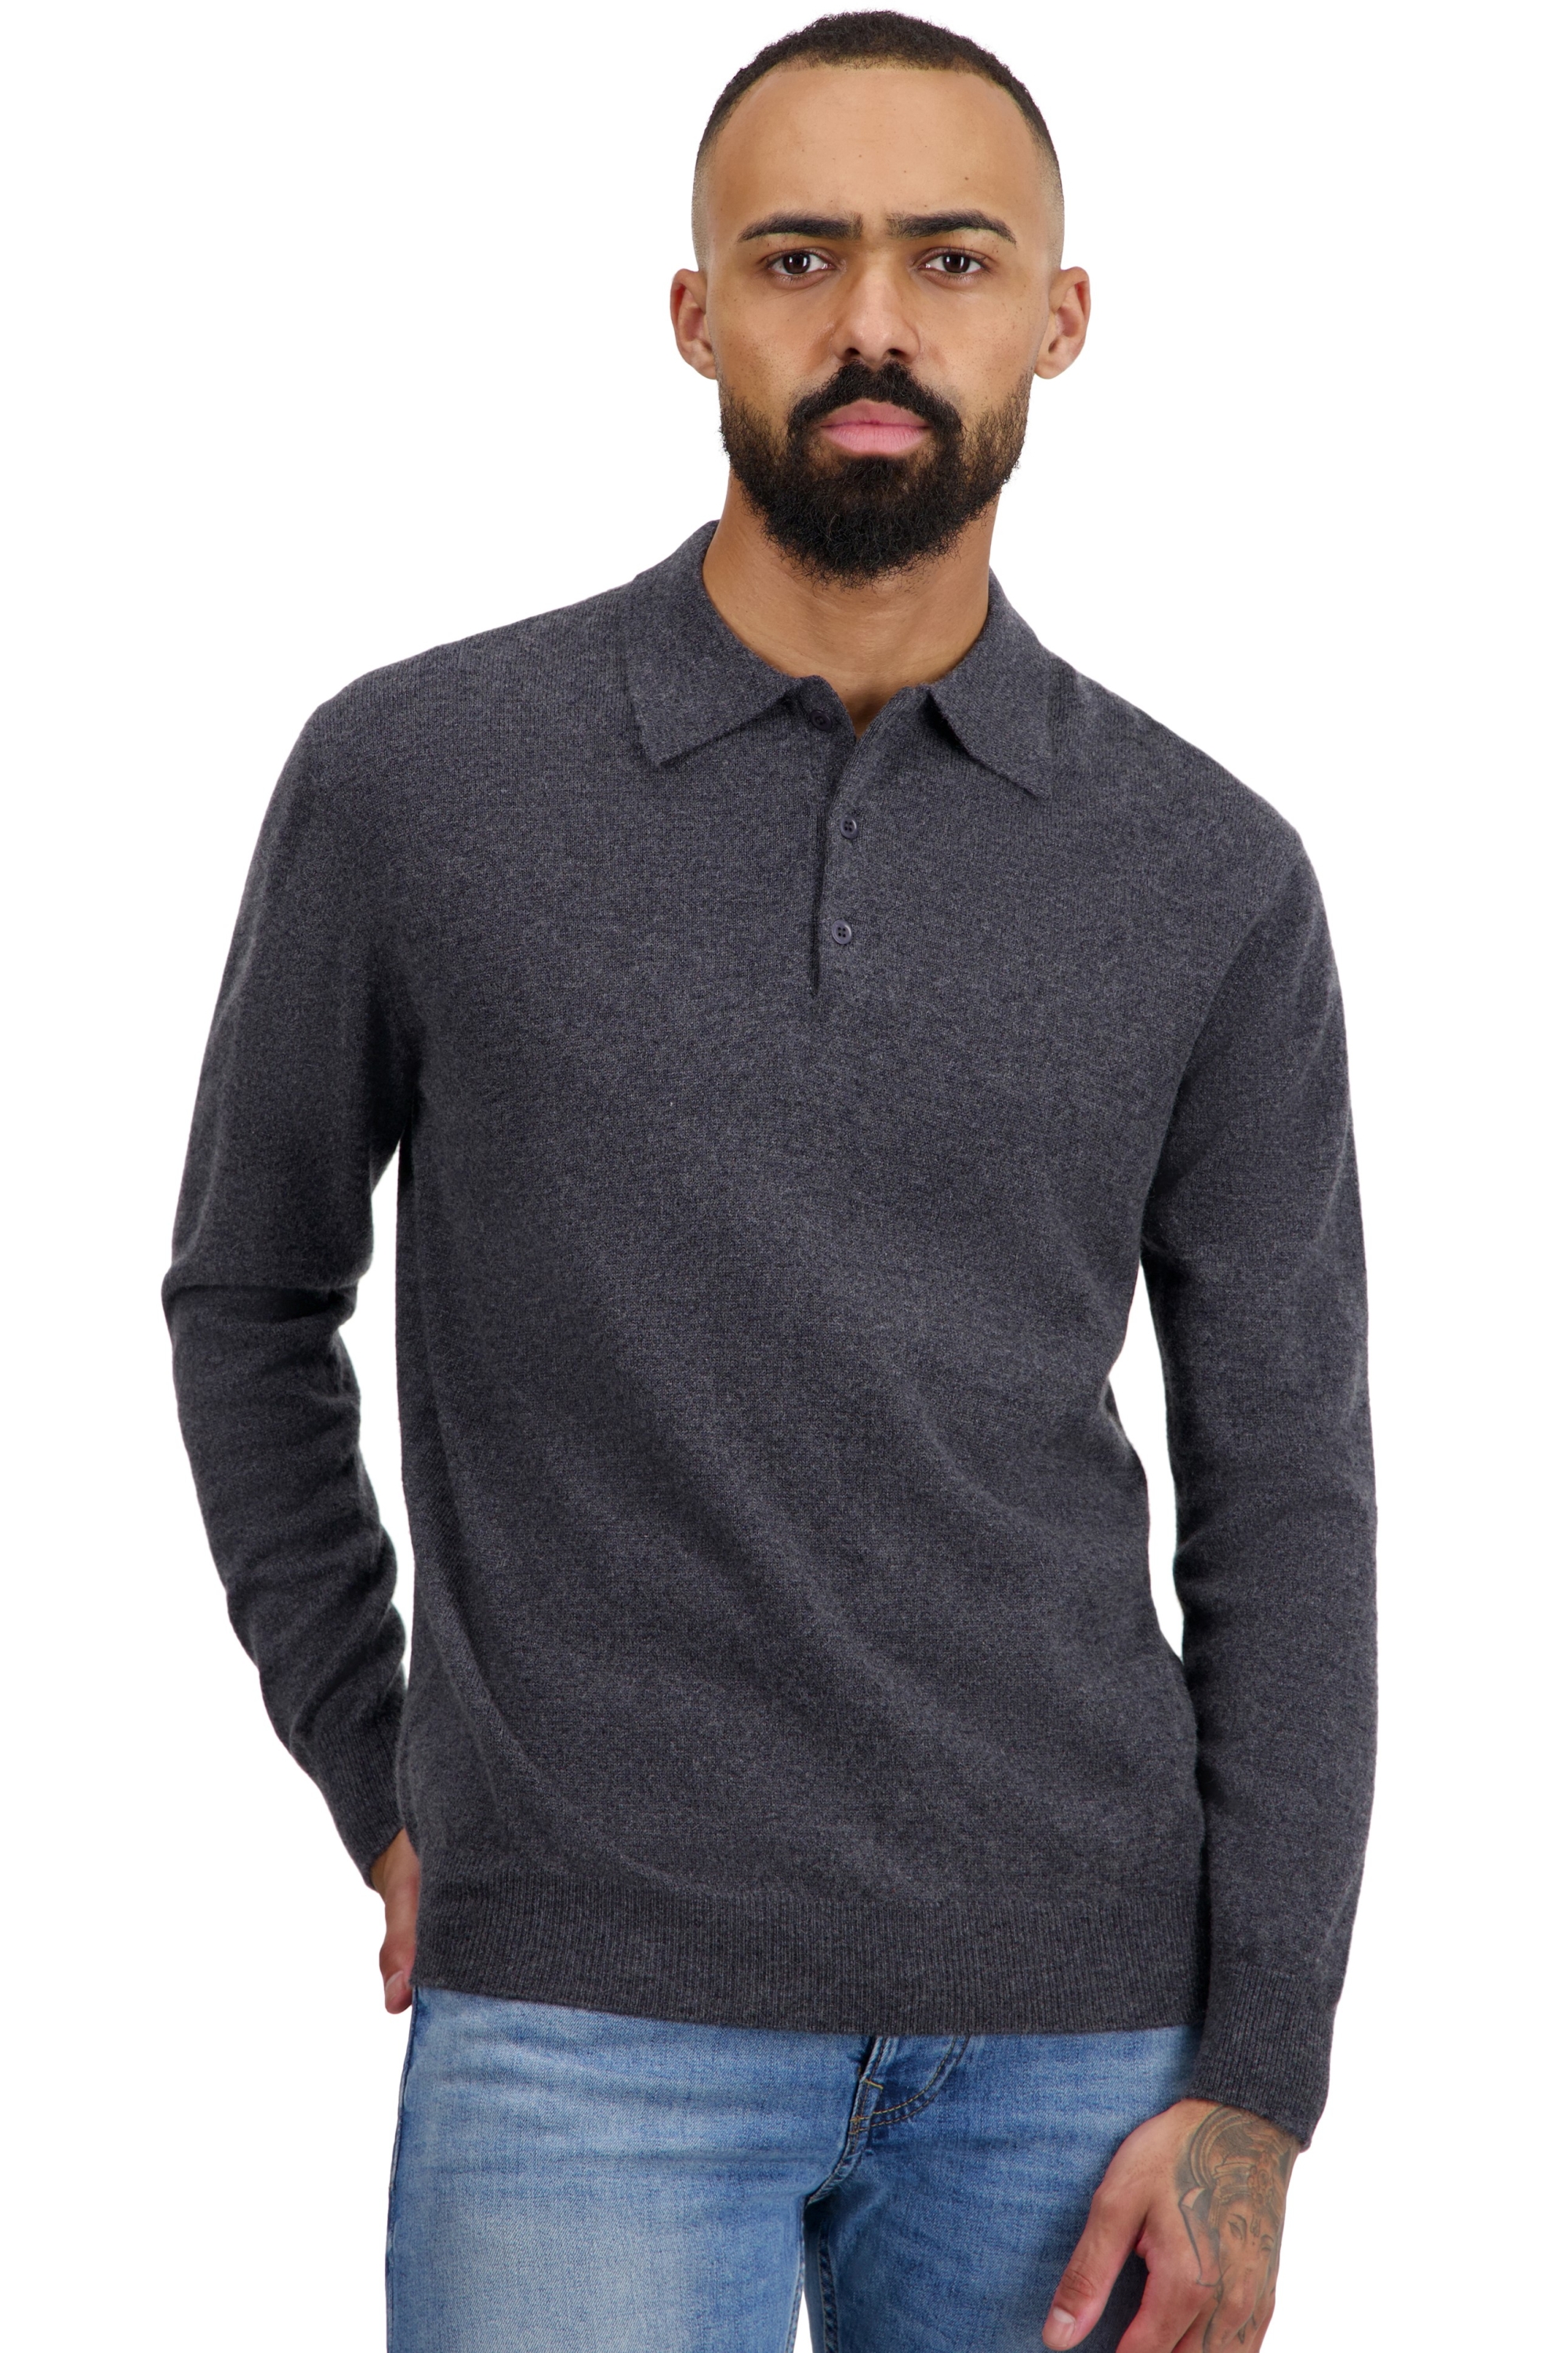 Cashmere men polo style sweaters tarn first charcoal marl 3xl